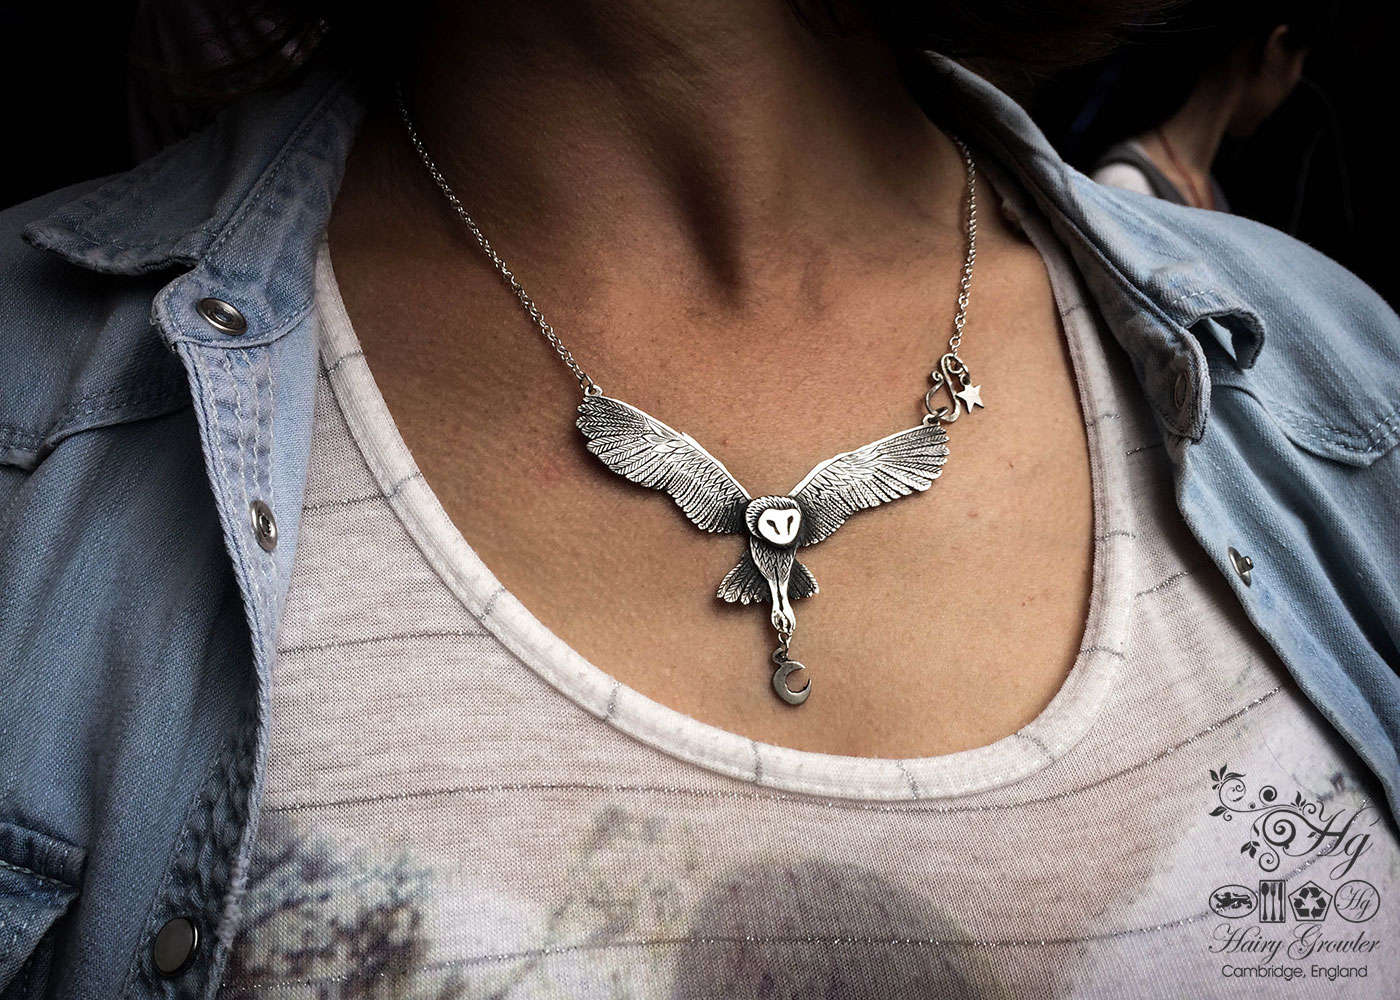 Blodeuwedd, The Owl In Your Life. Hand made and upcycled silver coin transformed into bespoke silver owl necklace